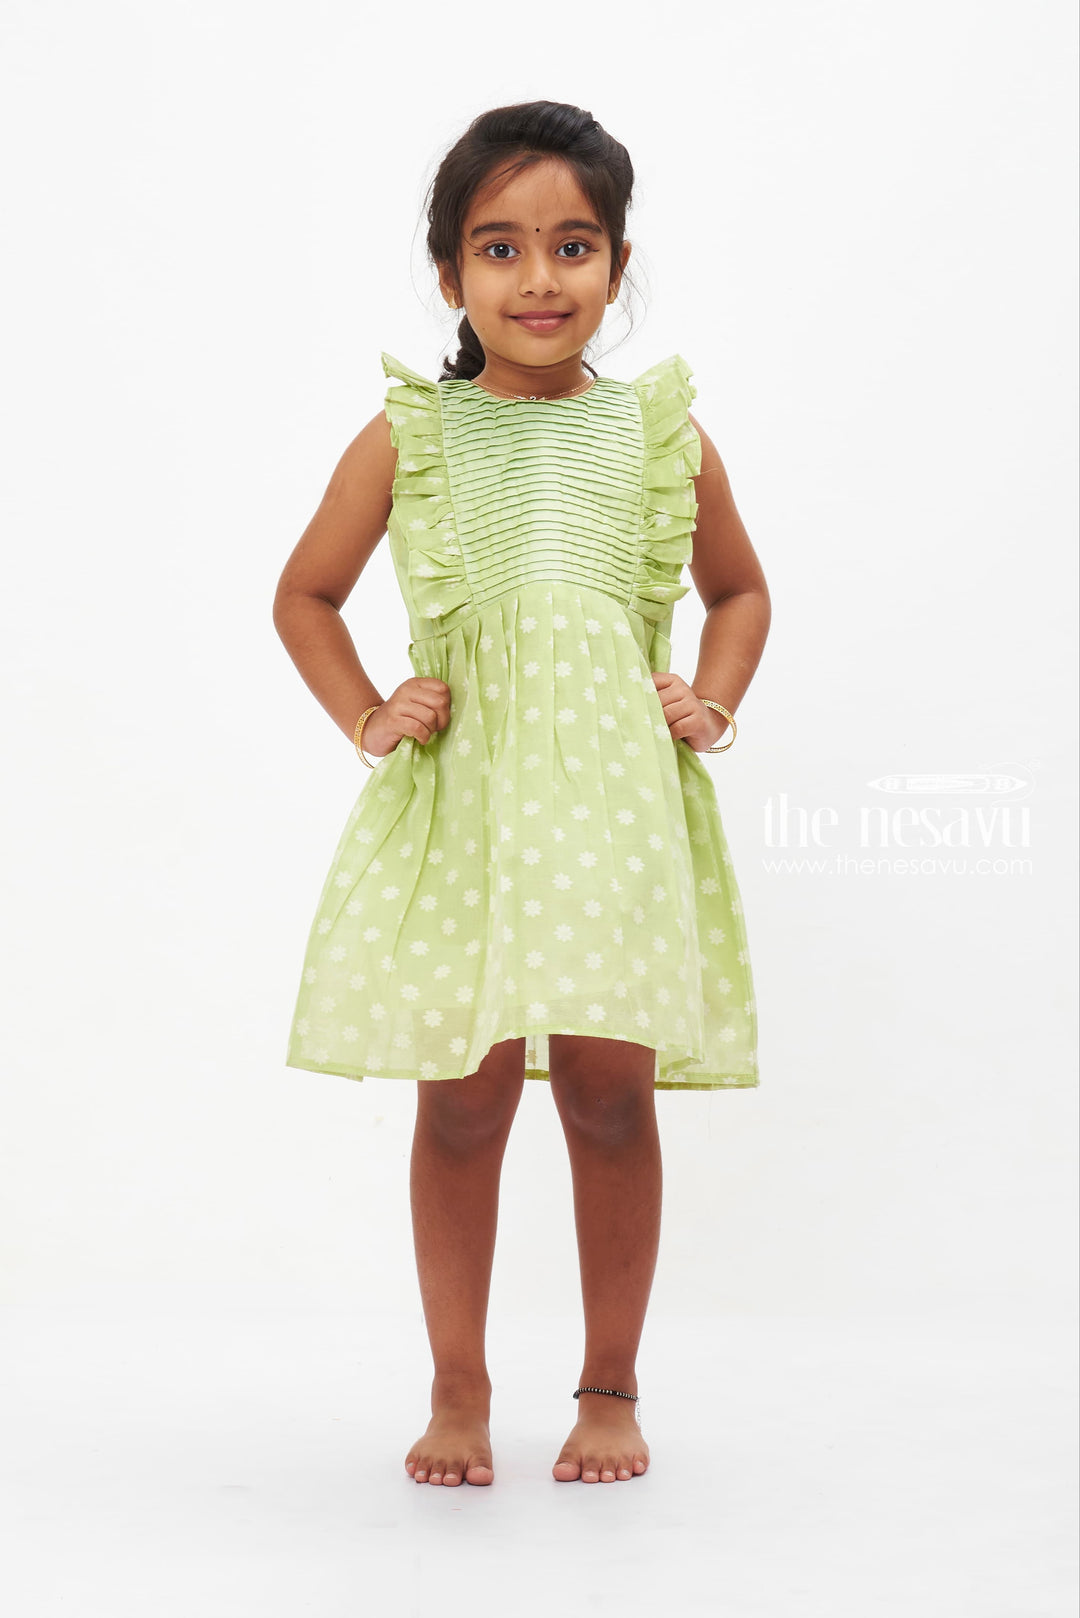 The Nesavu Baby Cotton Frocks Spring Green Flutter Sleeve Dress with White Floral Pattern Cotton Frock for Girls Nesavu 16 (1Y) / Green BFJ509B-16 Girls Spring Green Floral Dress with Flutter Sleeves | The Nesavu